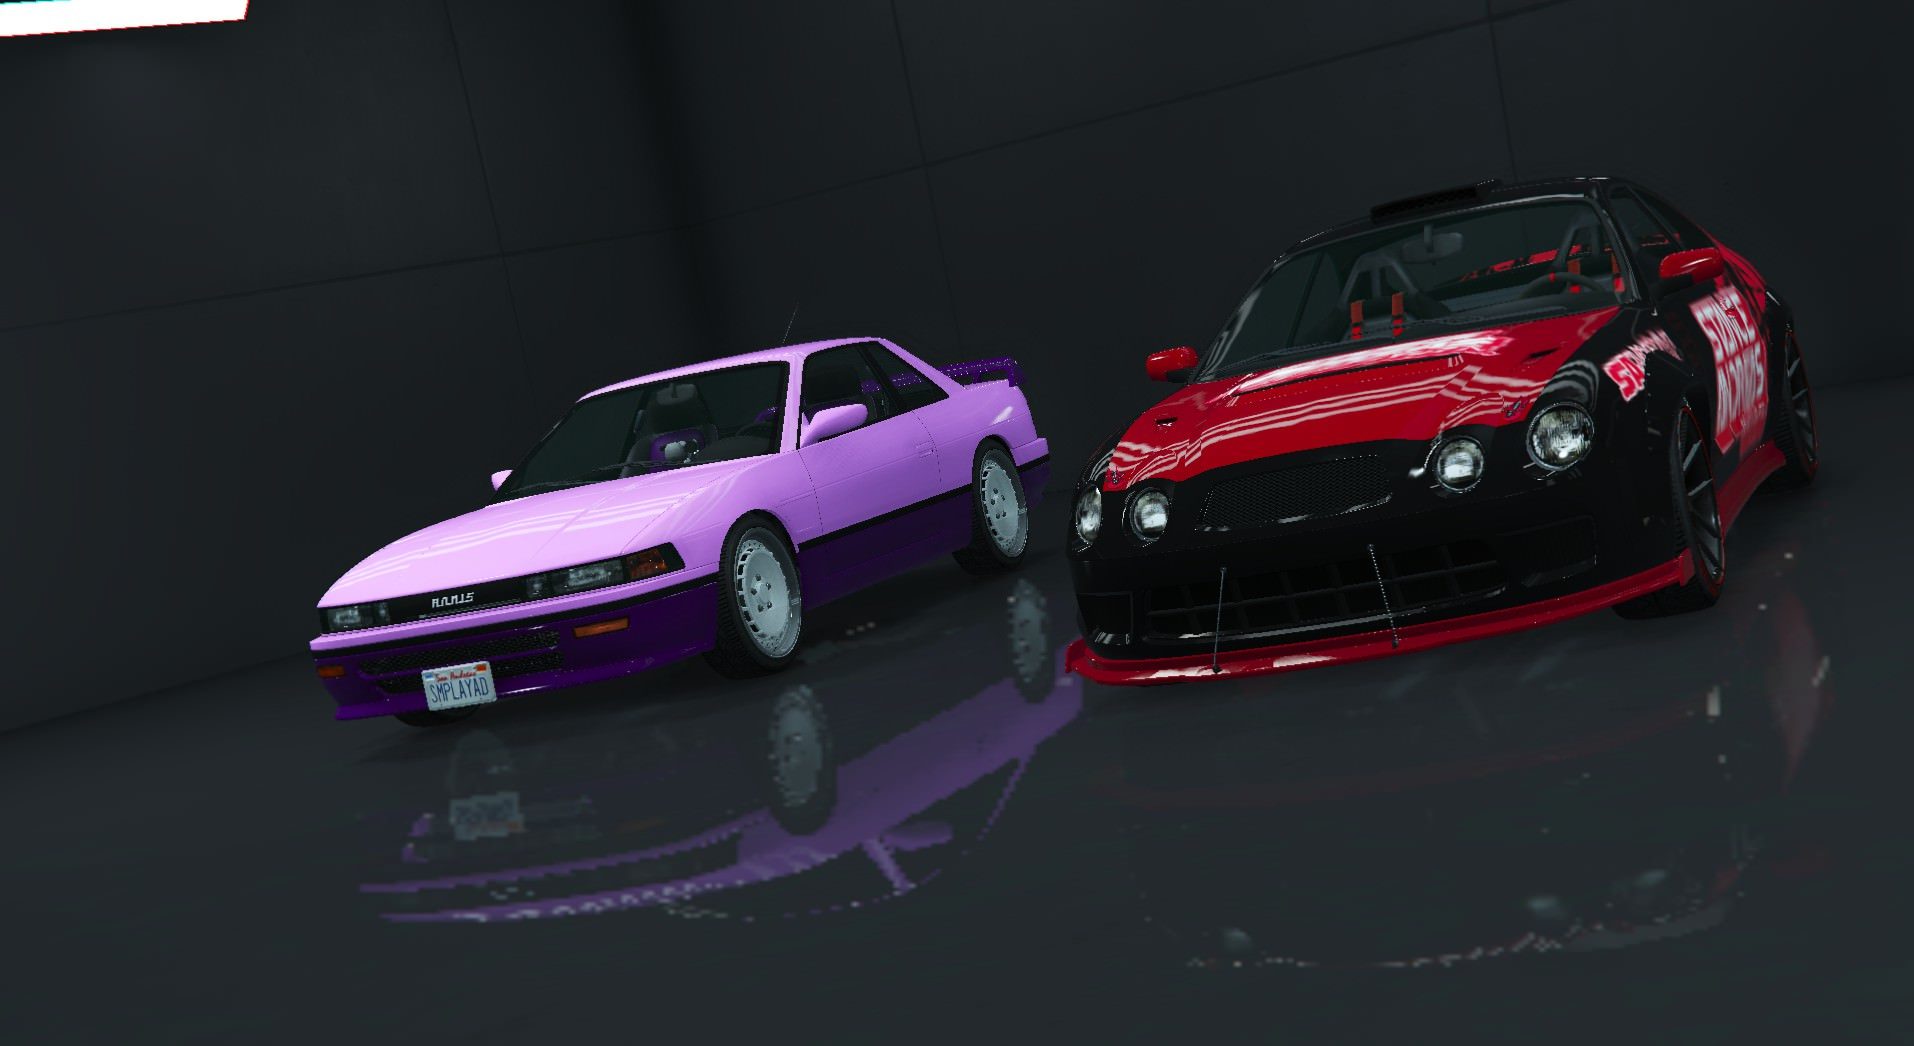 A quick go through of my new additions in the Tuners DLC 2: A top tier street race ready Calico and a clean daily driver Remus